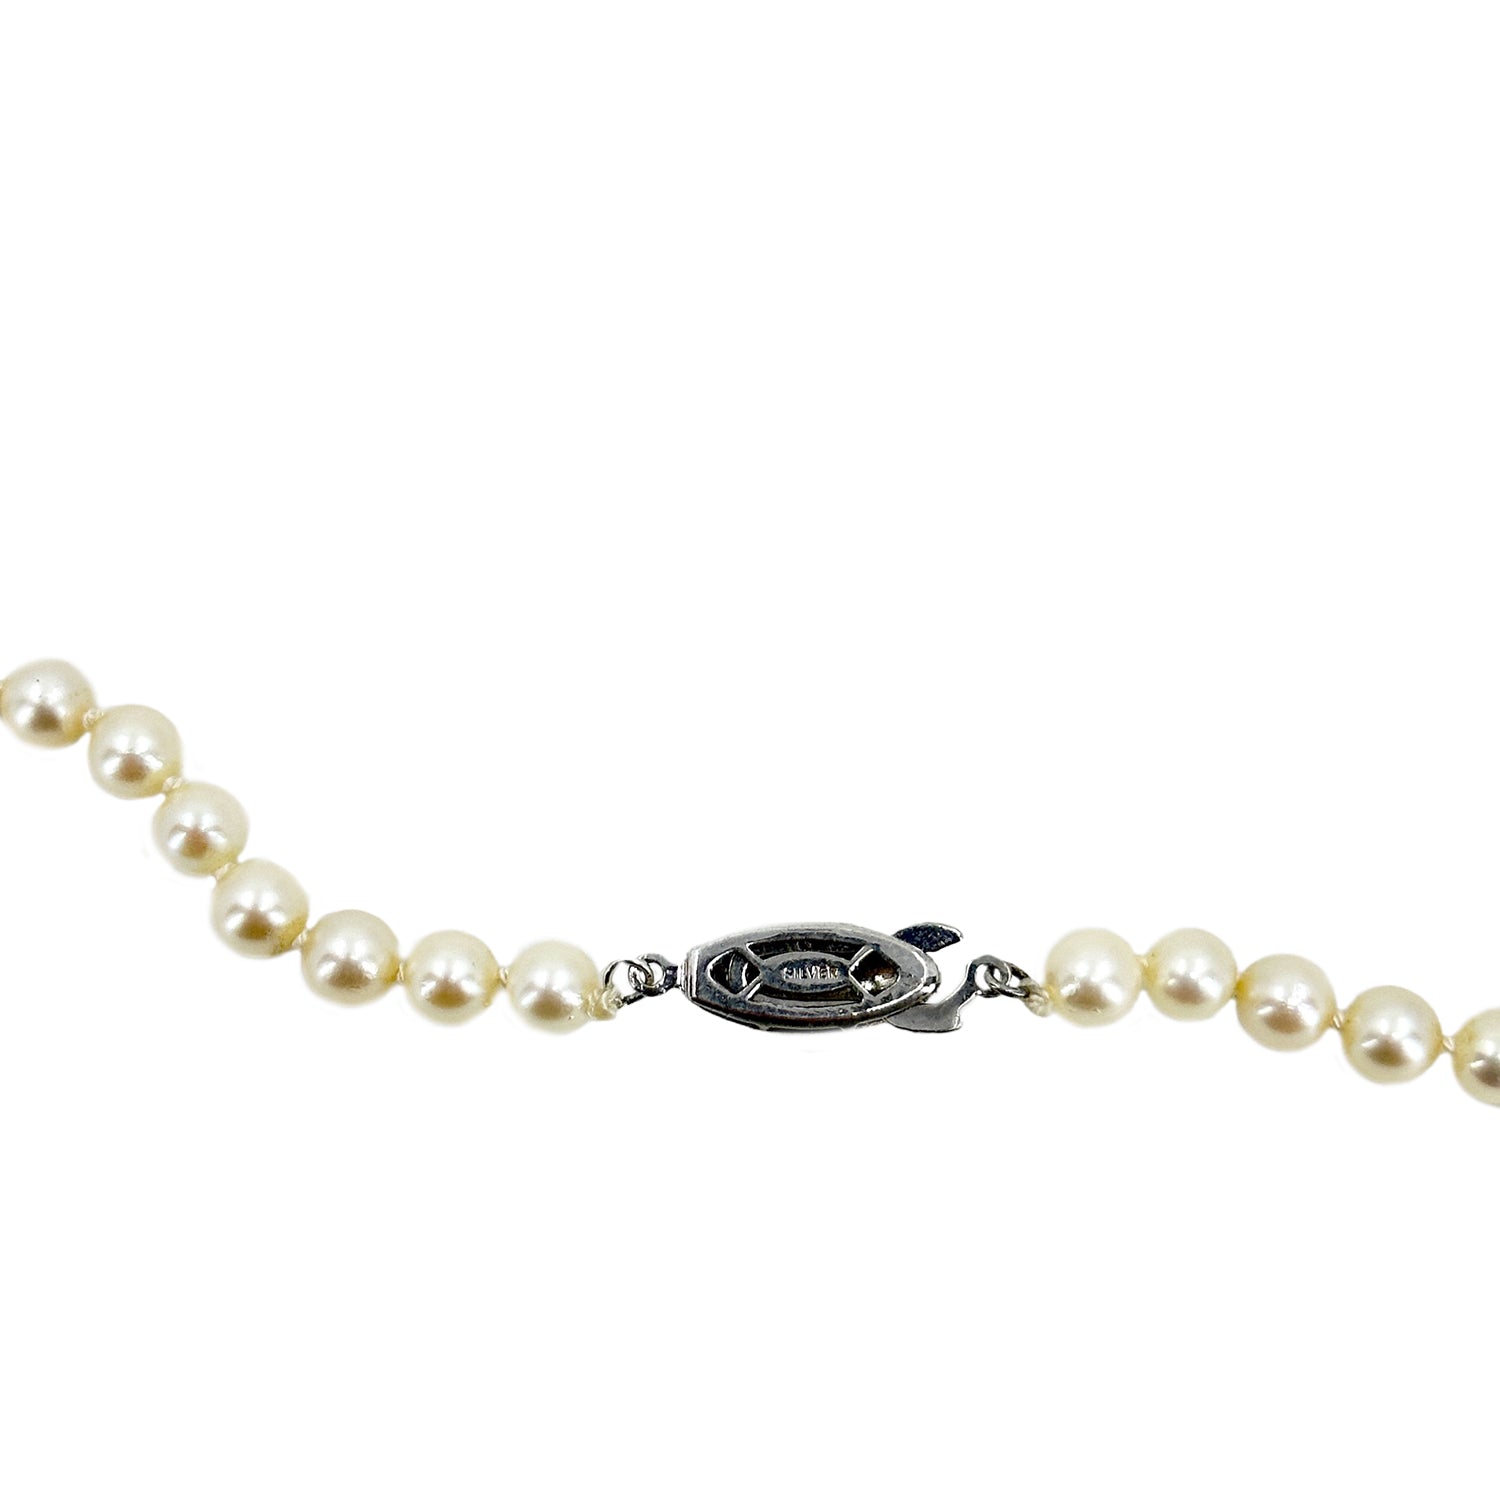 Vintage Engraved Japanese Saltwater Cultured Akoya Pearl Necklace - Sterling Silver 18.25 Inch